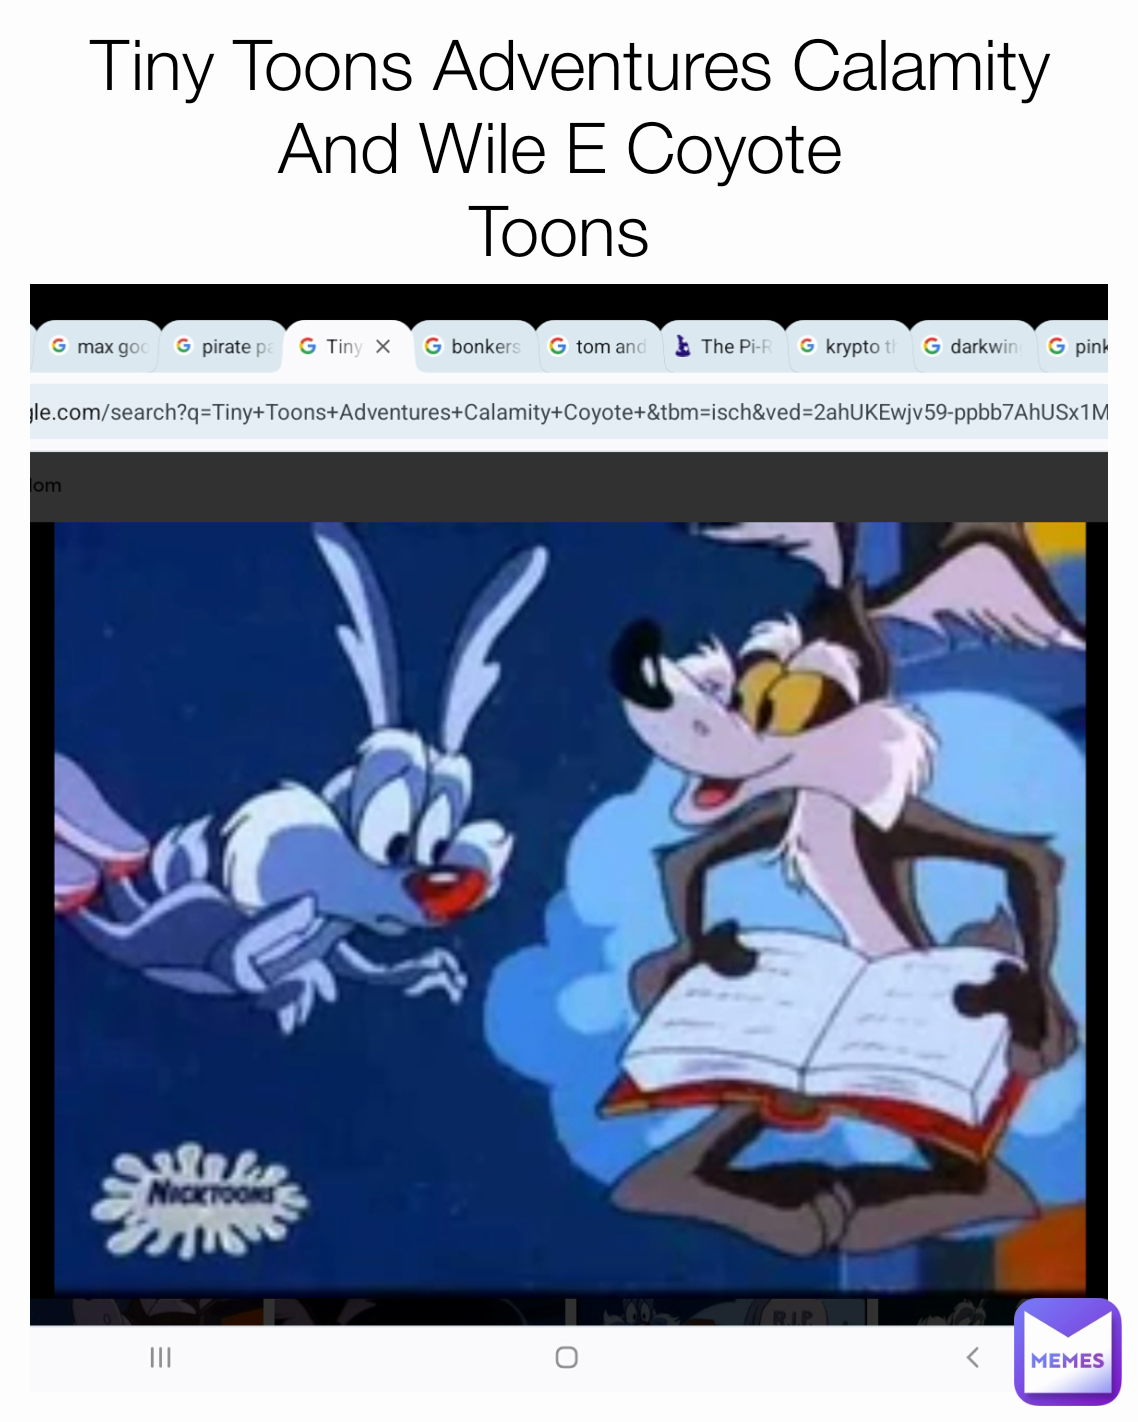 Tiny Toons Adventures Calamity And Wile E Coyote 
Toons 